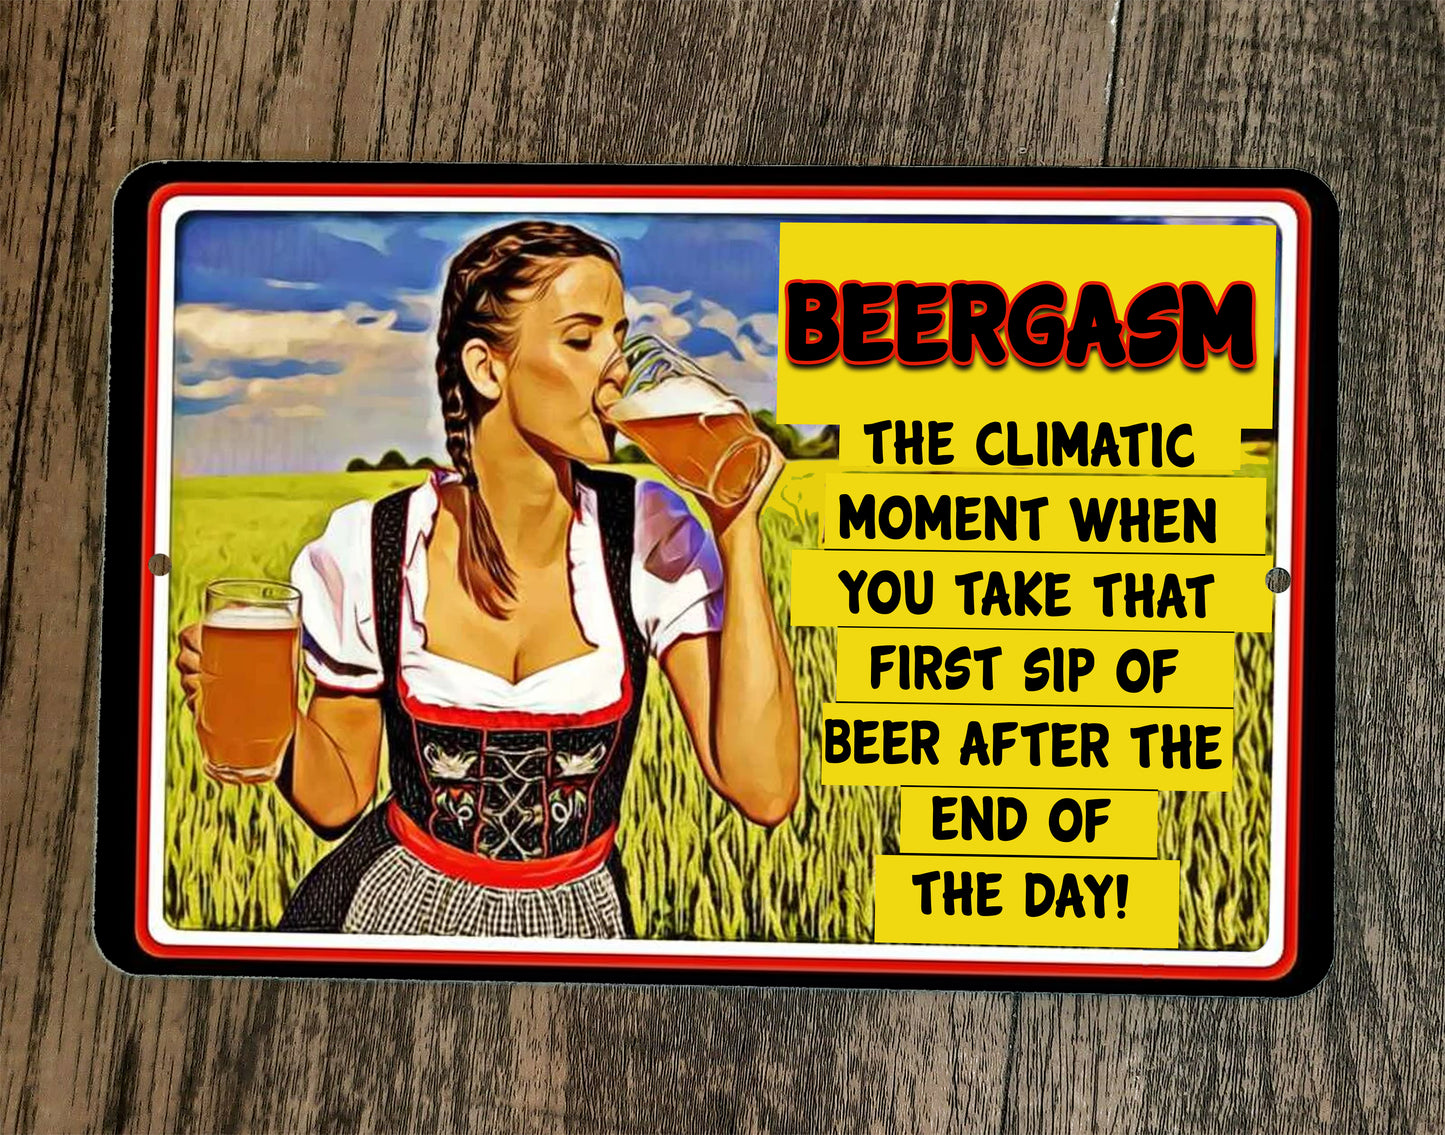 Beergasm The Climatic Moment End of the Day 8x12 Metal Wall Alcohol Bar Sign